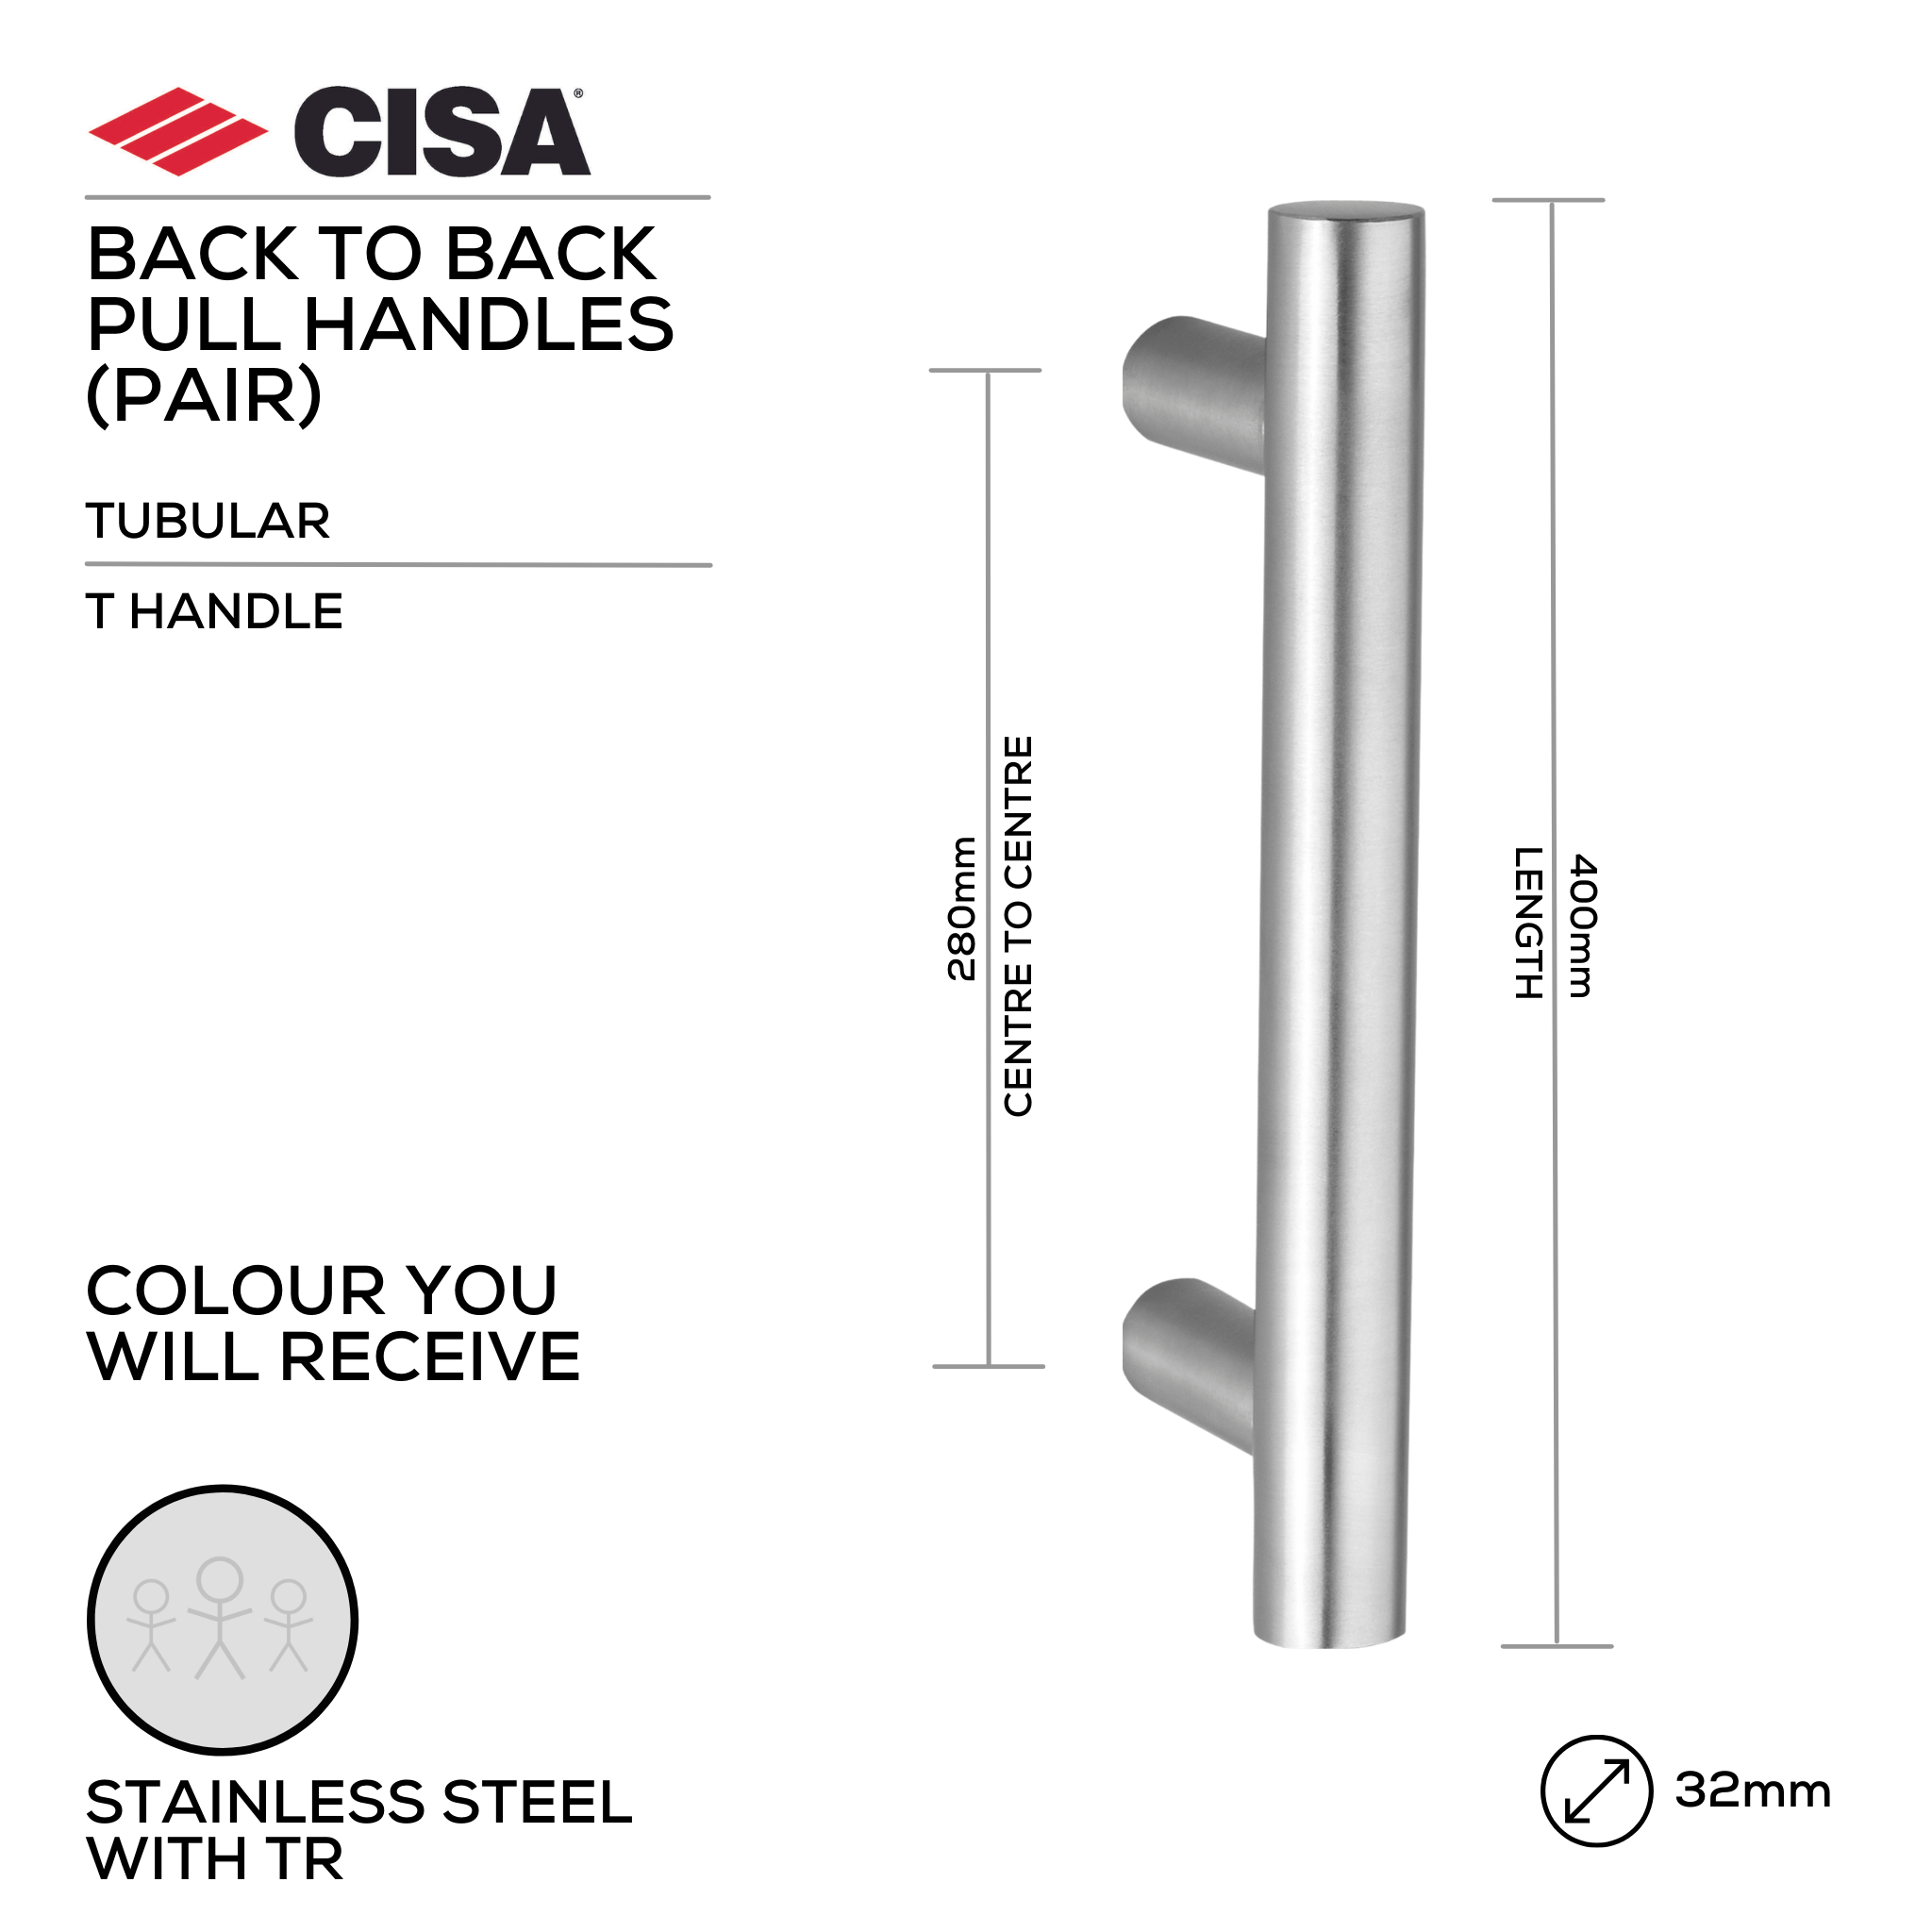 FP.T03.BB.TR, Pull Handle, Tubular, T Handle, BTB, 32mm (Ø) x 400mm (l) x 280mm (ctc), Stainless Steel with Tarnish Resistant, CISA